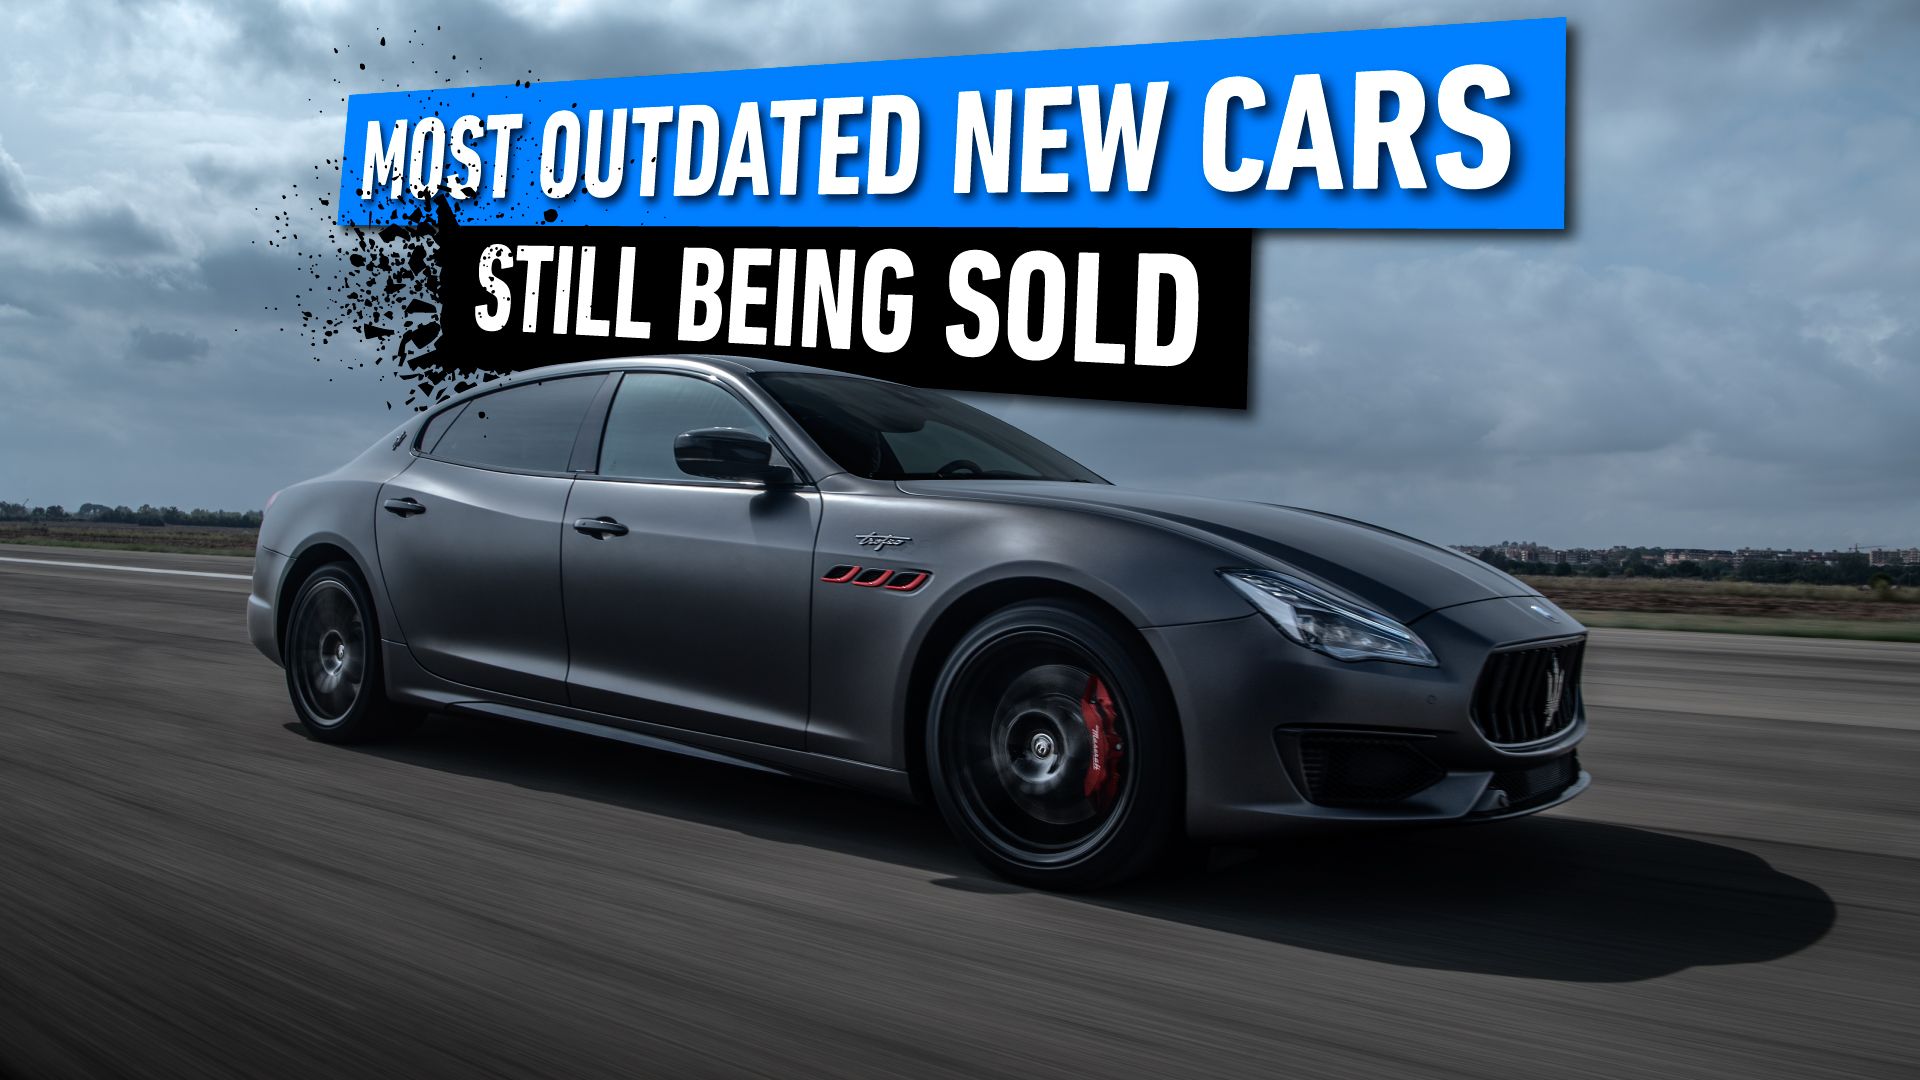 Most-Outdated-New-Cars